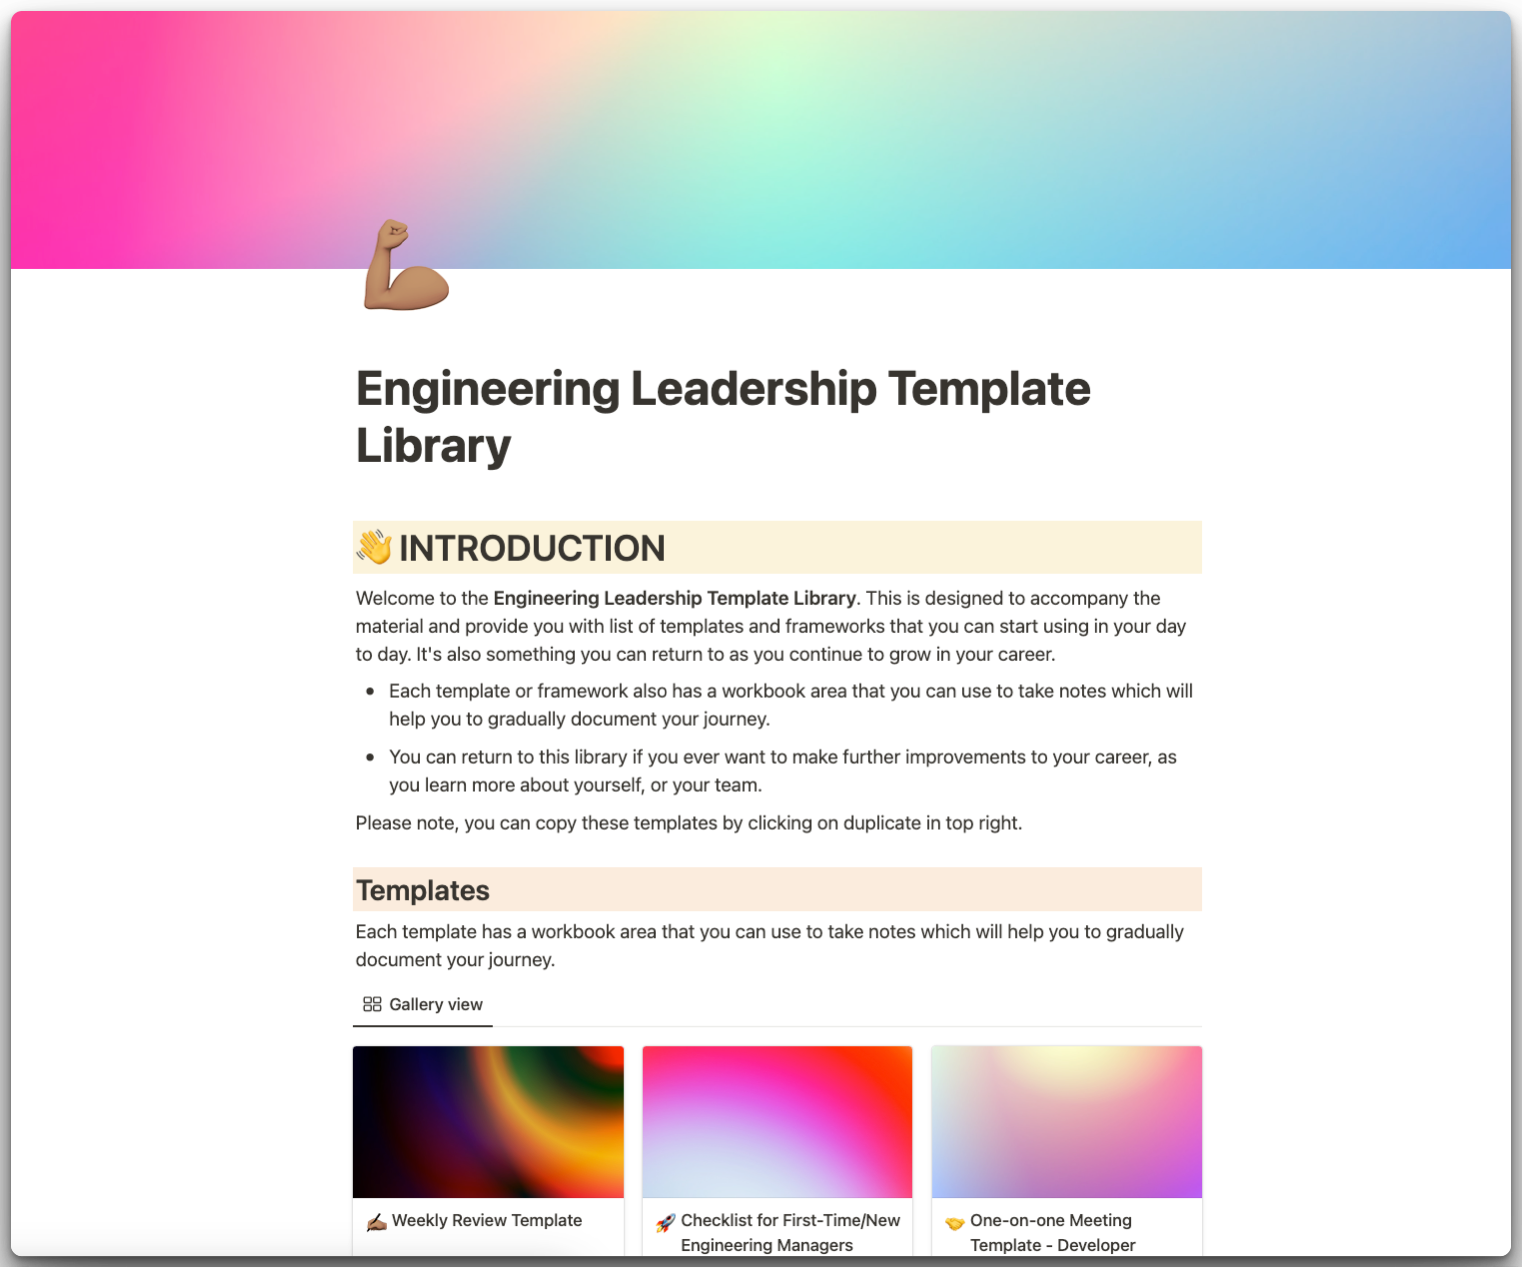 Template Library